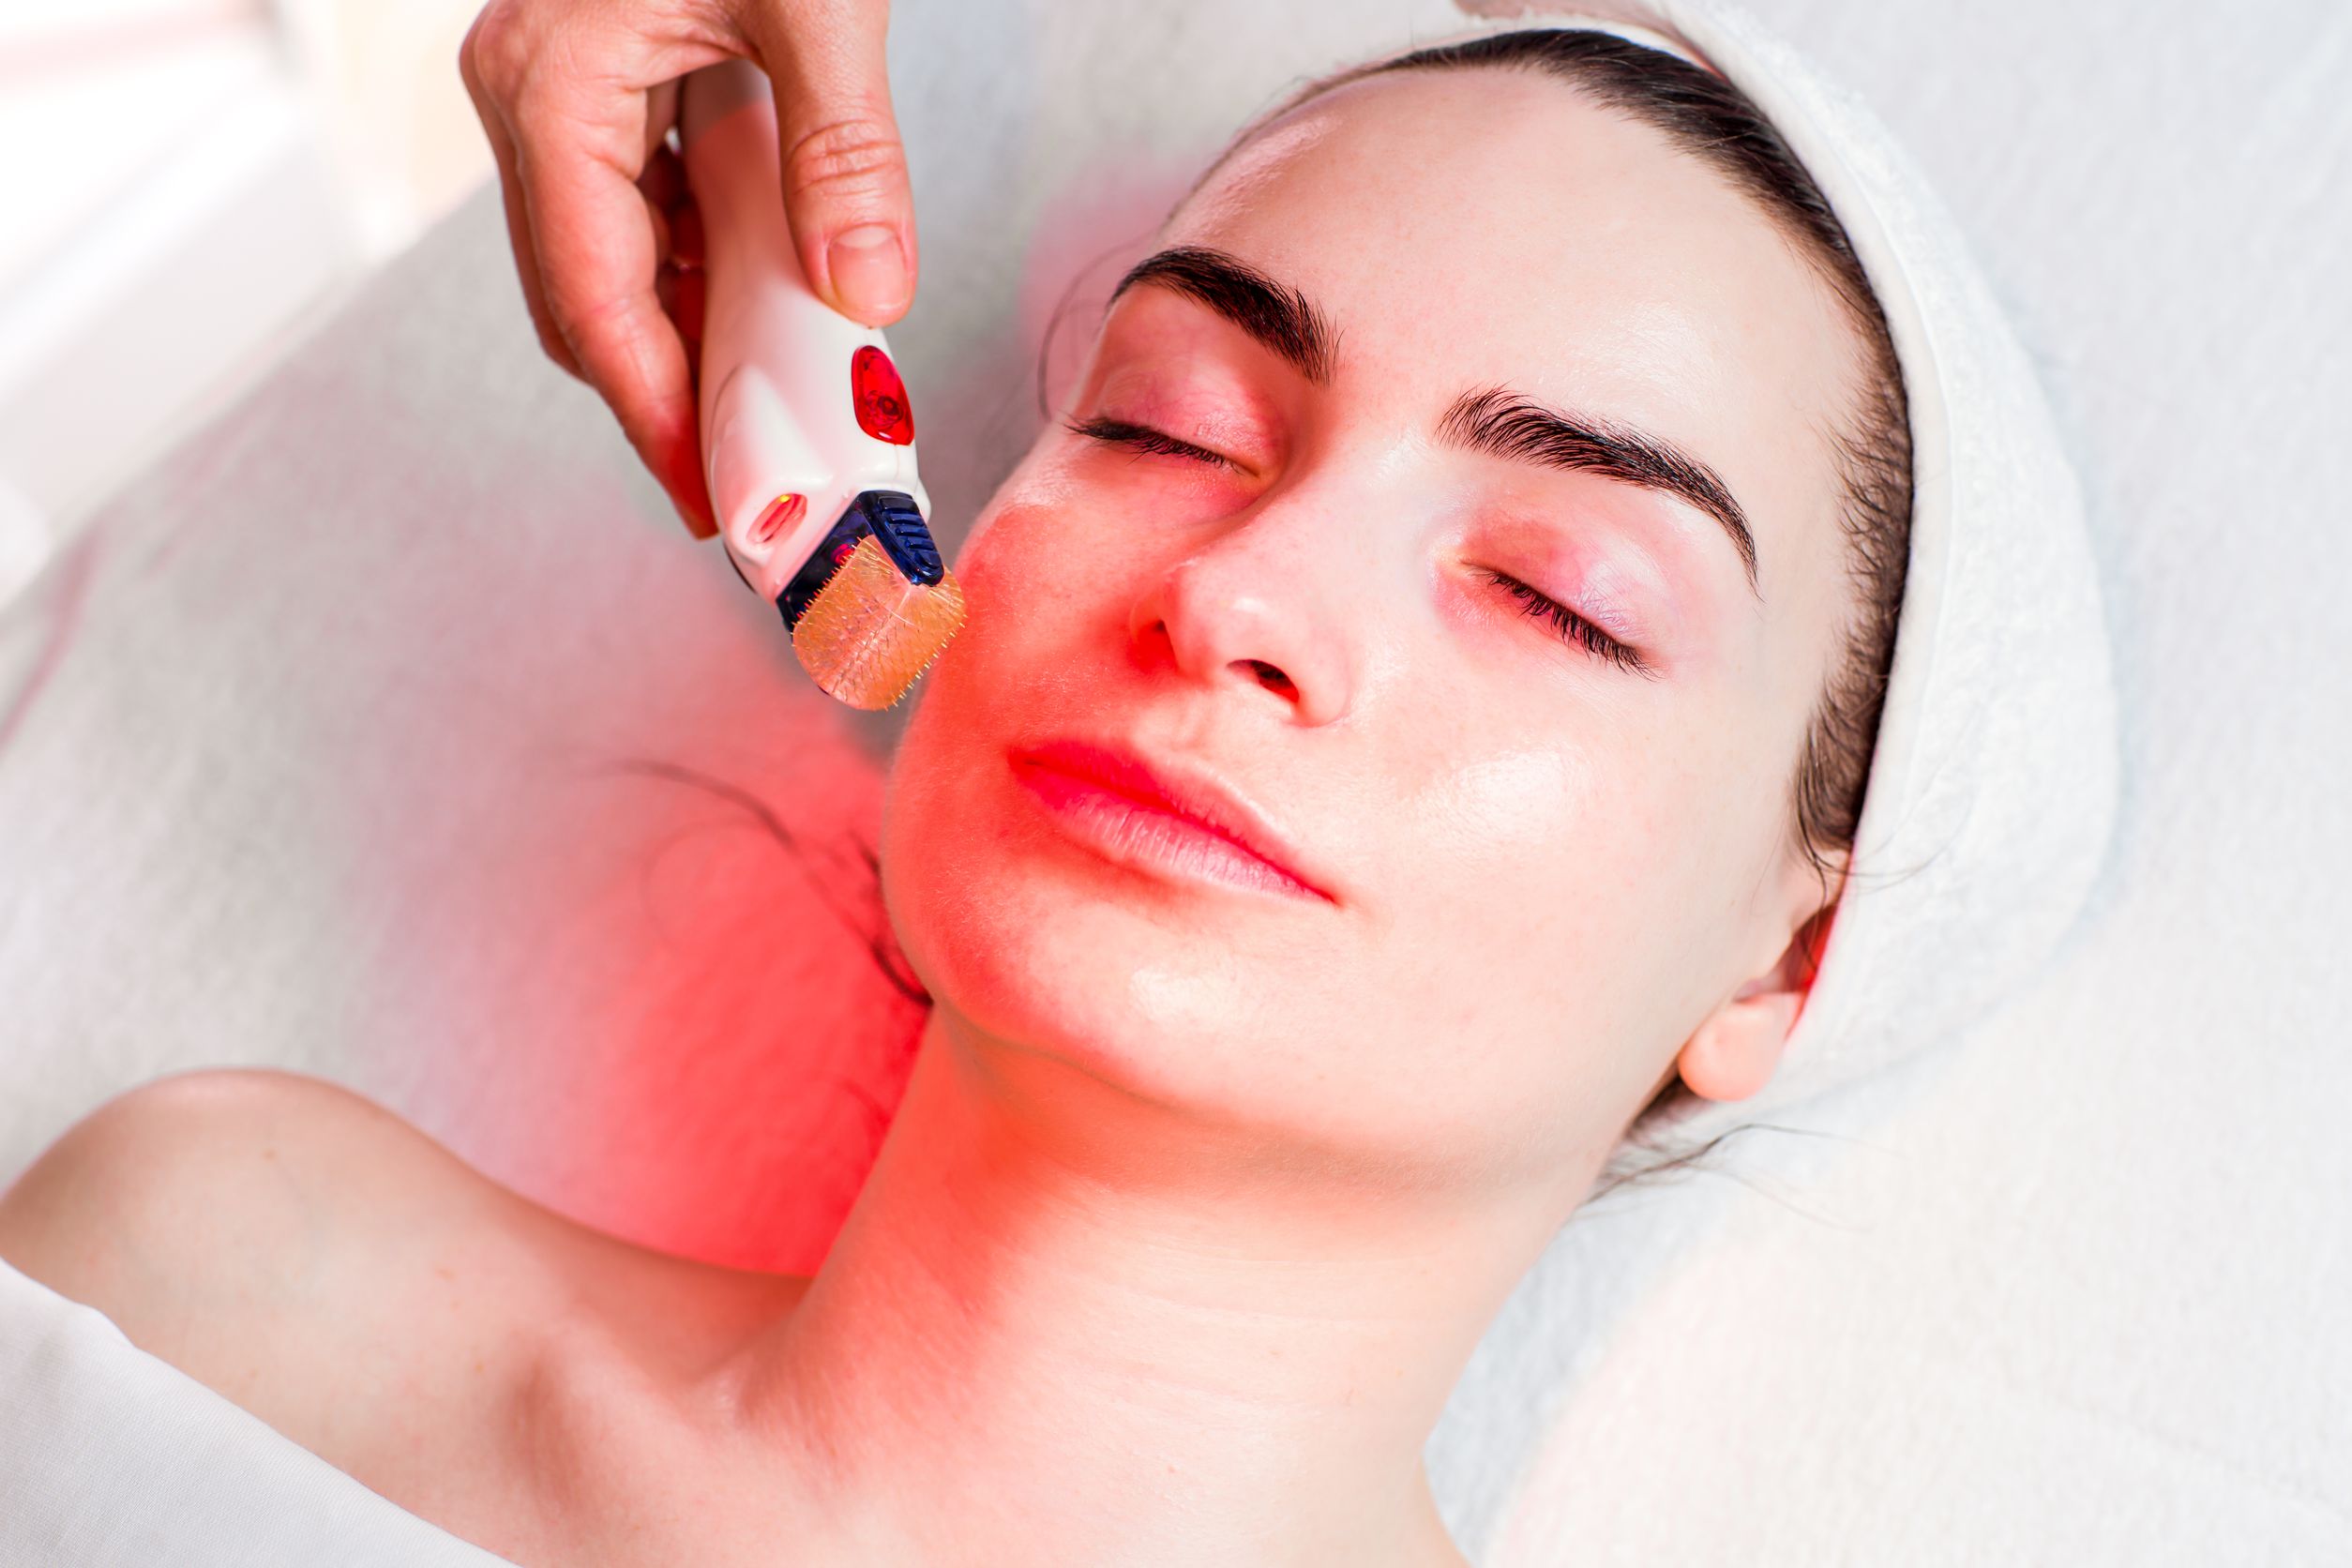 Getting The Best Results From Laser Hair Removal